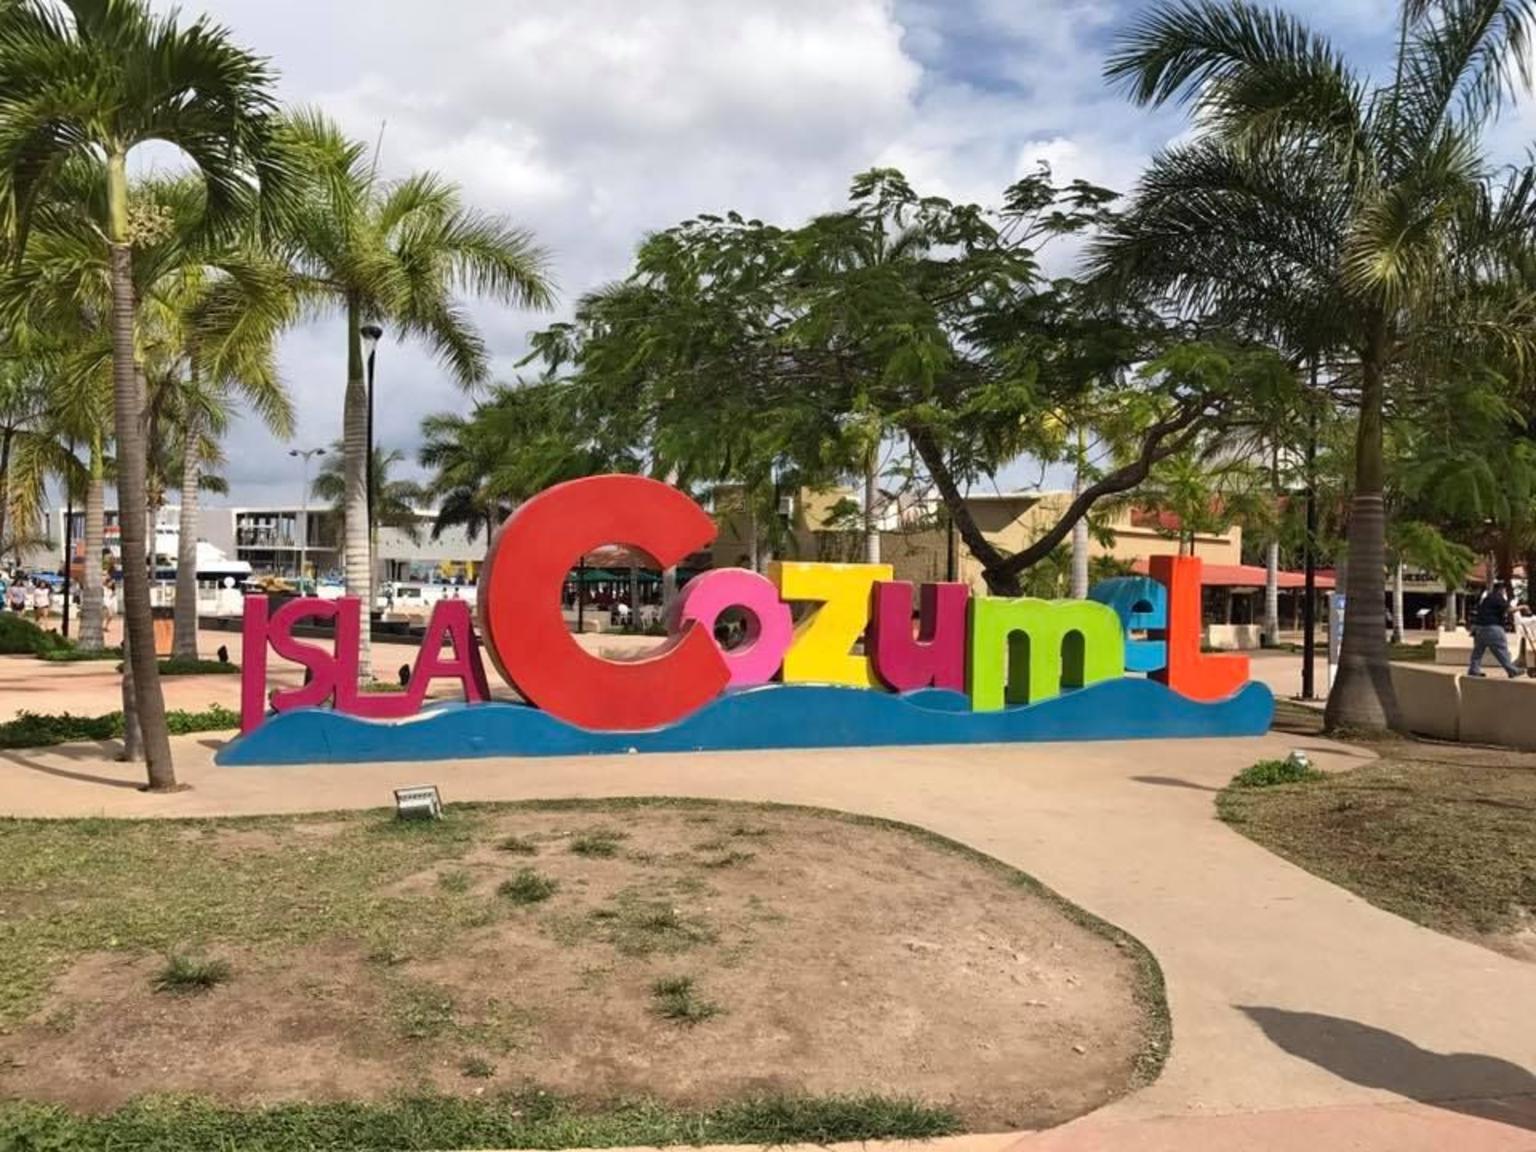 8 Best Tours In Cozumel, Mexico - Updated 2021 | Trip101